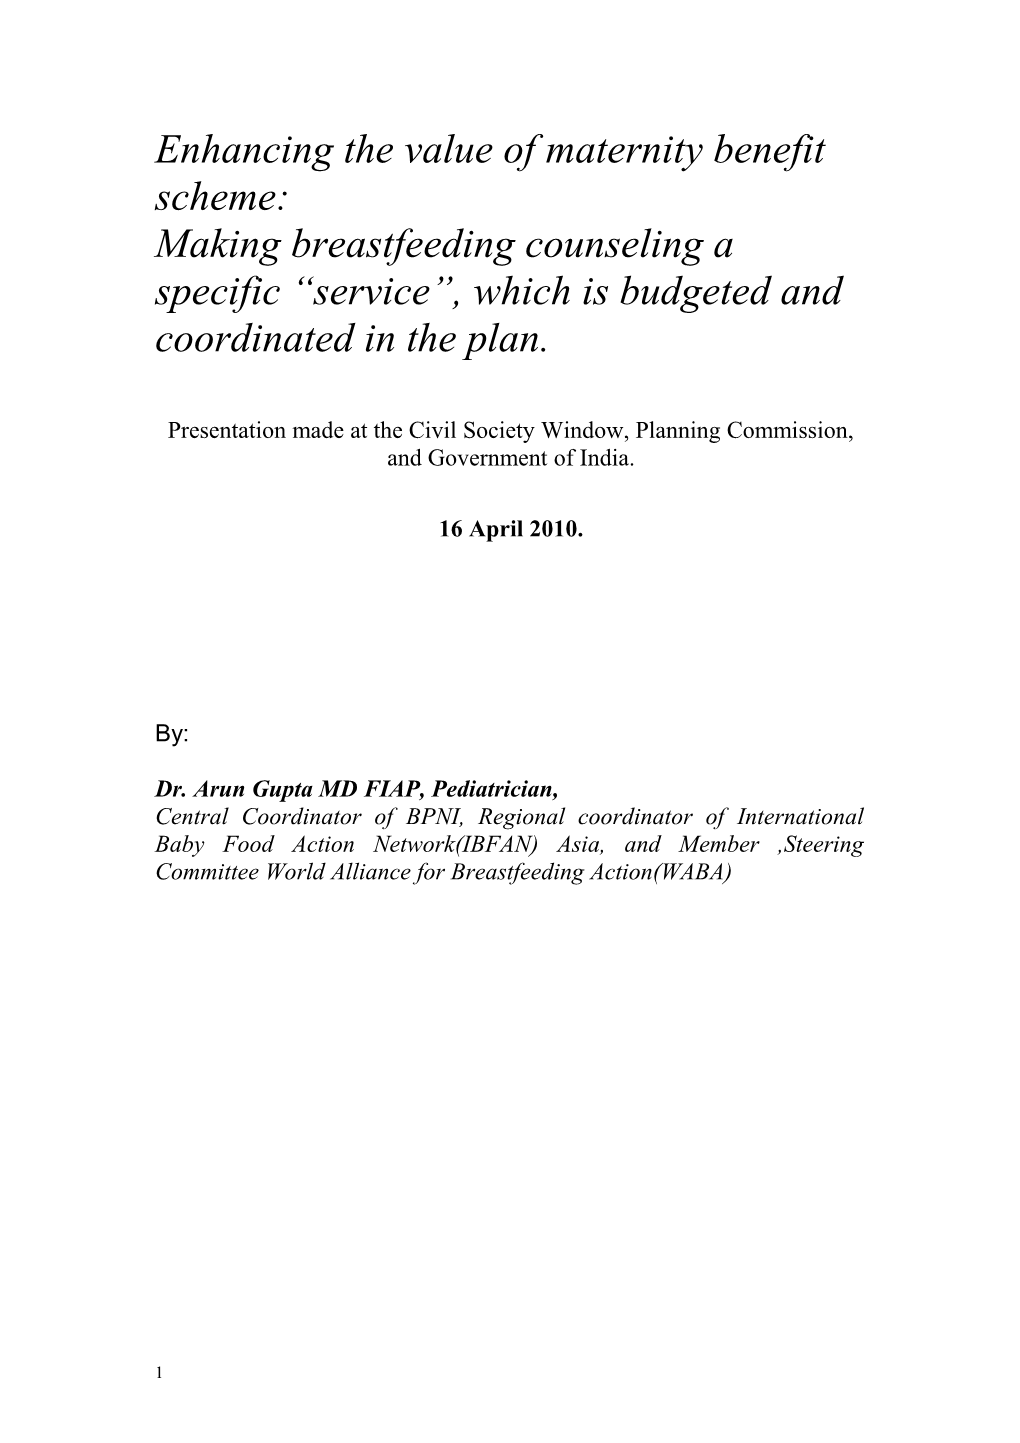 Enhancing the Value of Maternity Benefit Scheme: Making Breastfeeding Counseling to Be